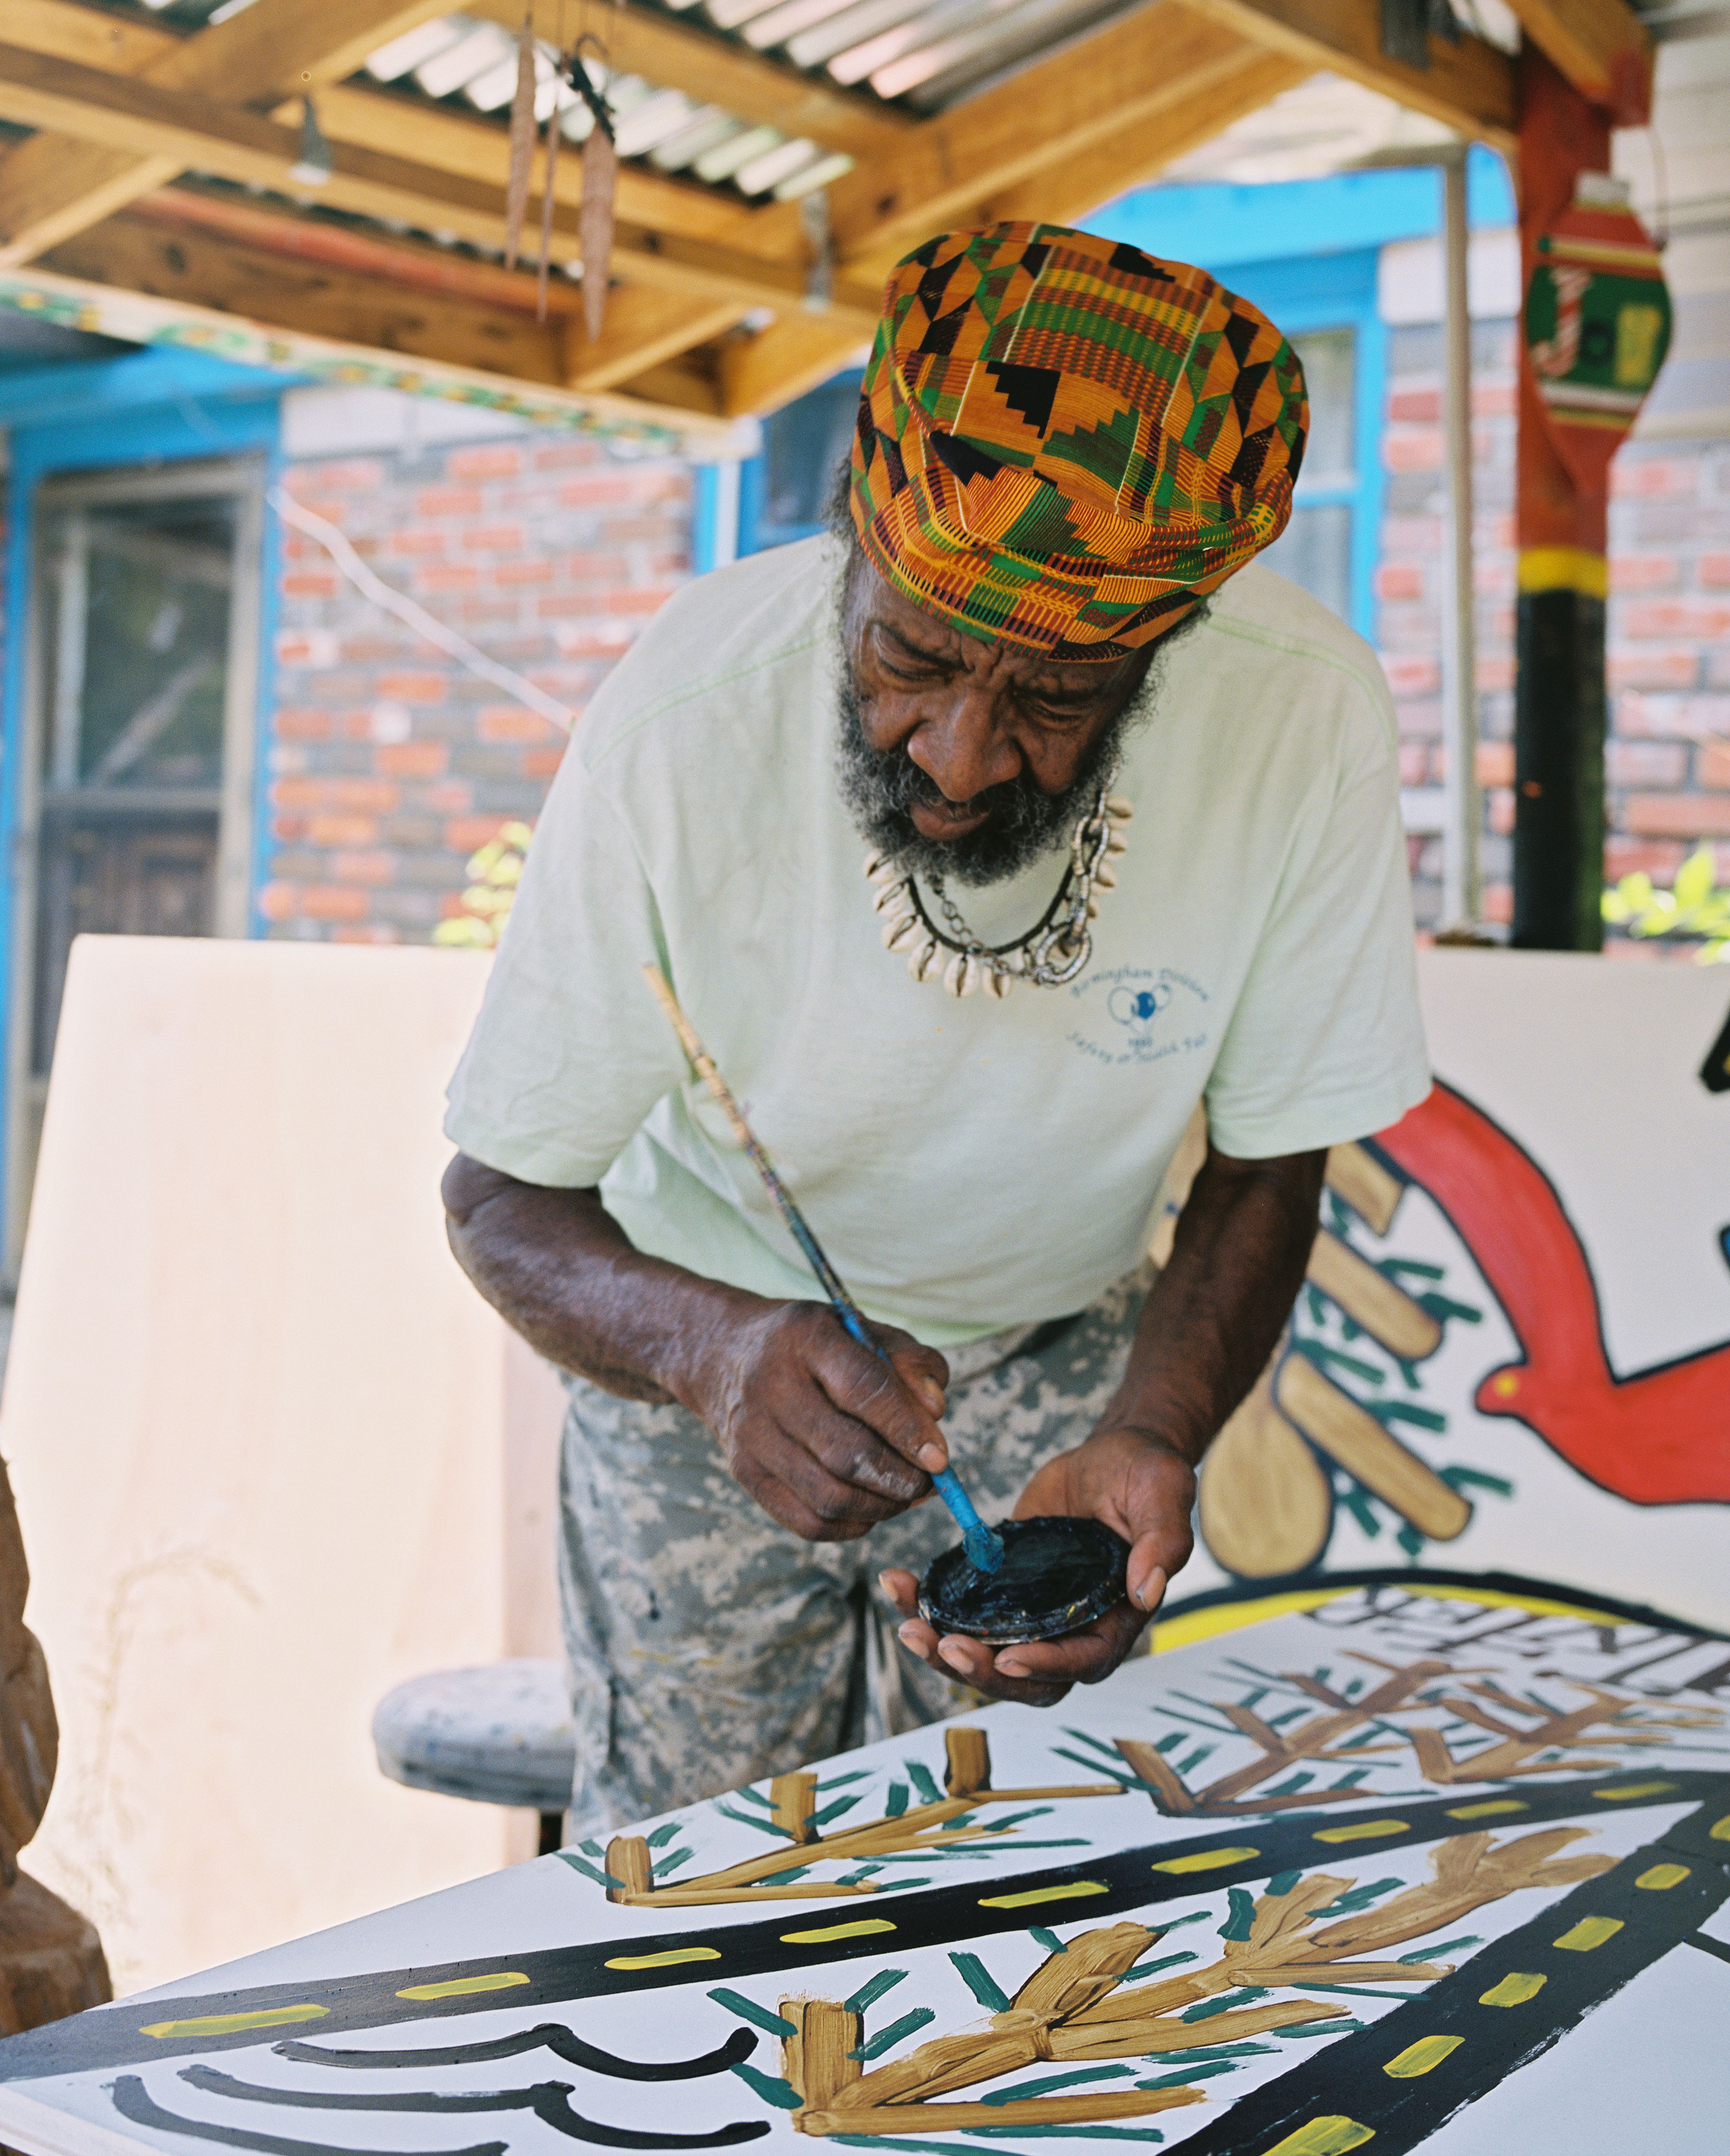 Joe, in a Kente cloth hat and camouflage pants, poised with a brush over a large painting 